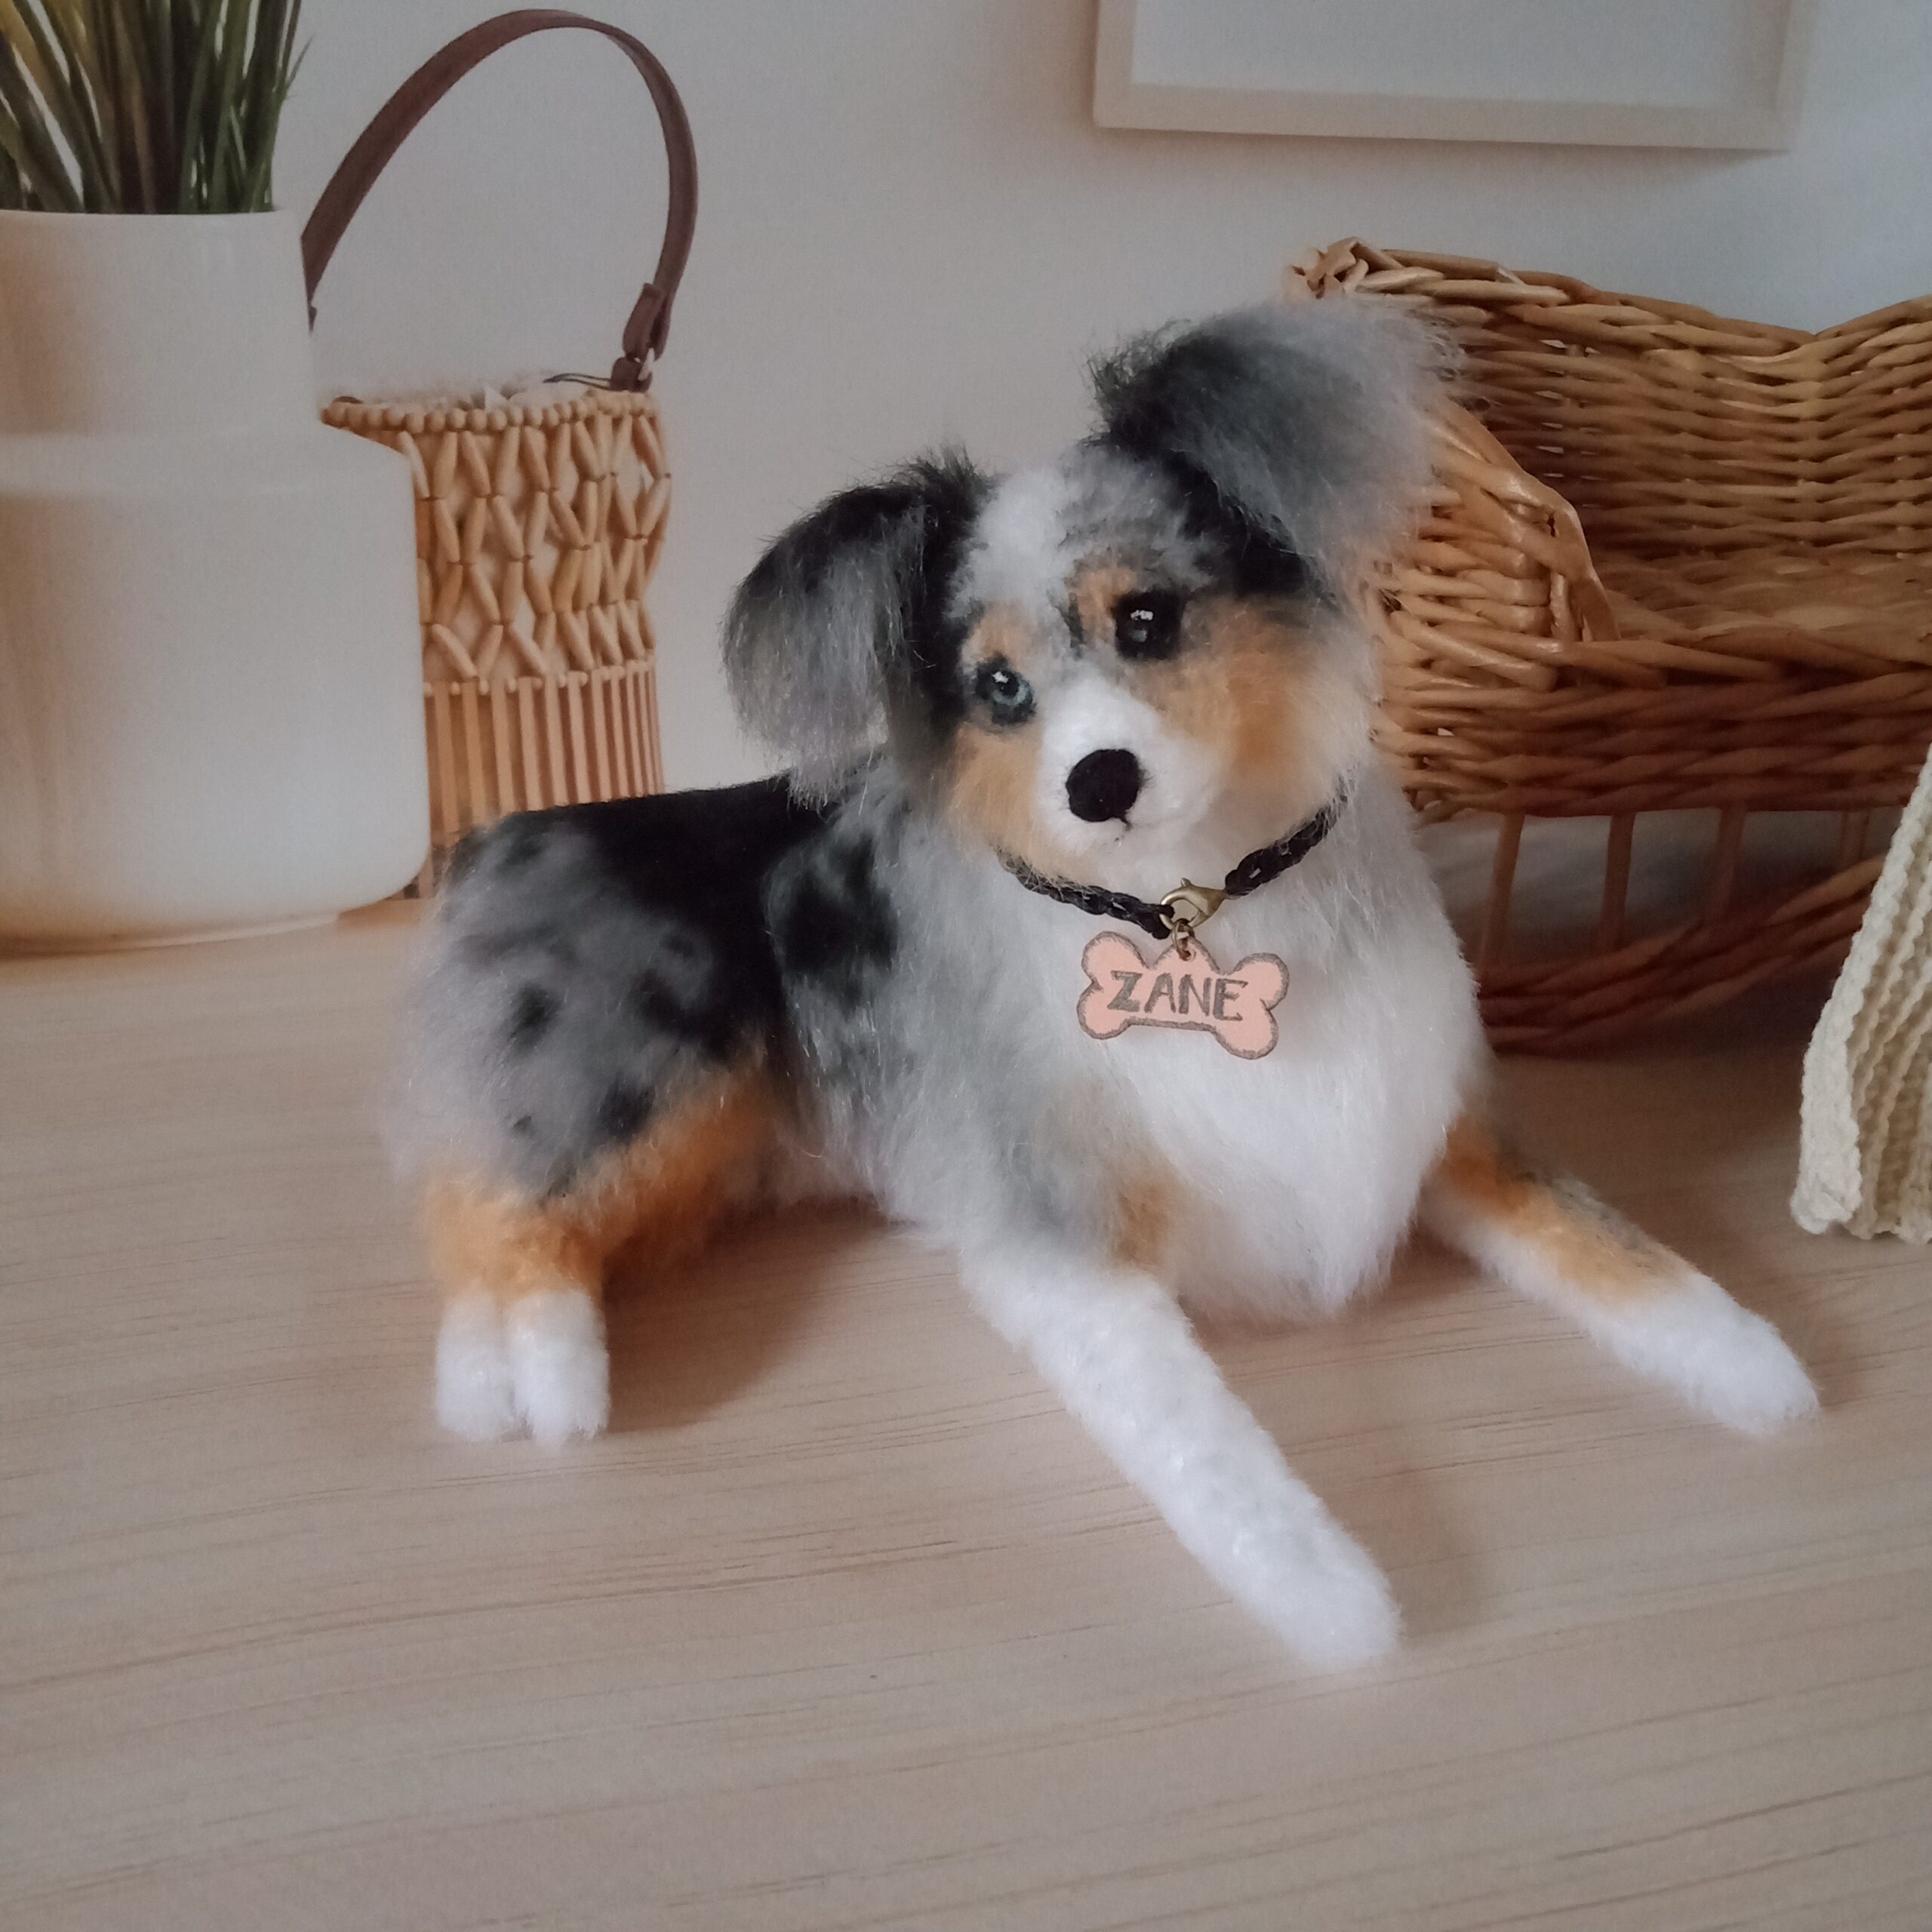 Australian Shepherd handmade soft and cuddly realistic 12 collectable toy  dog 5030717124763 on eBid United States